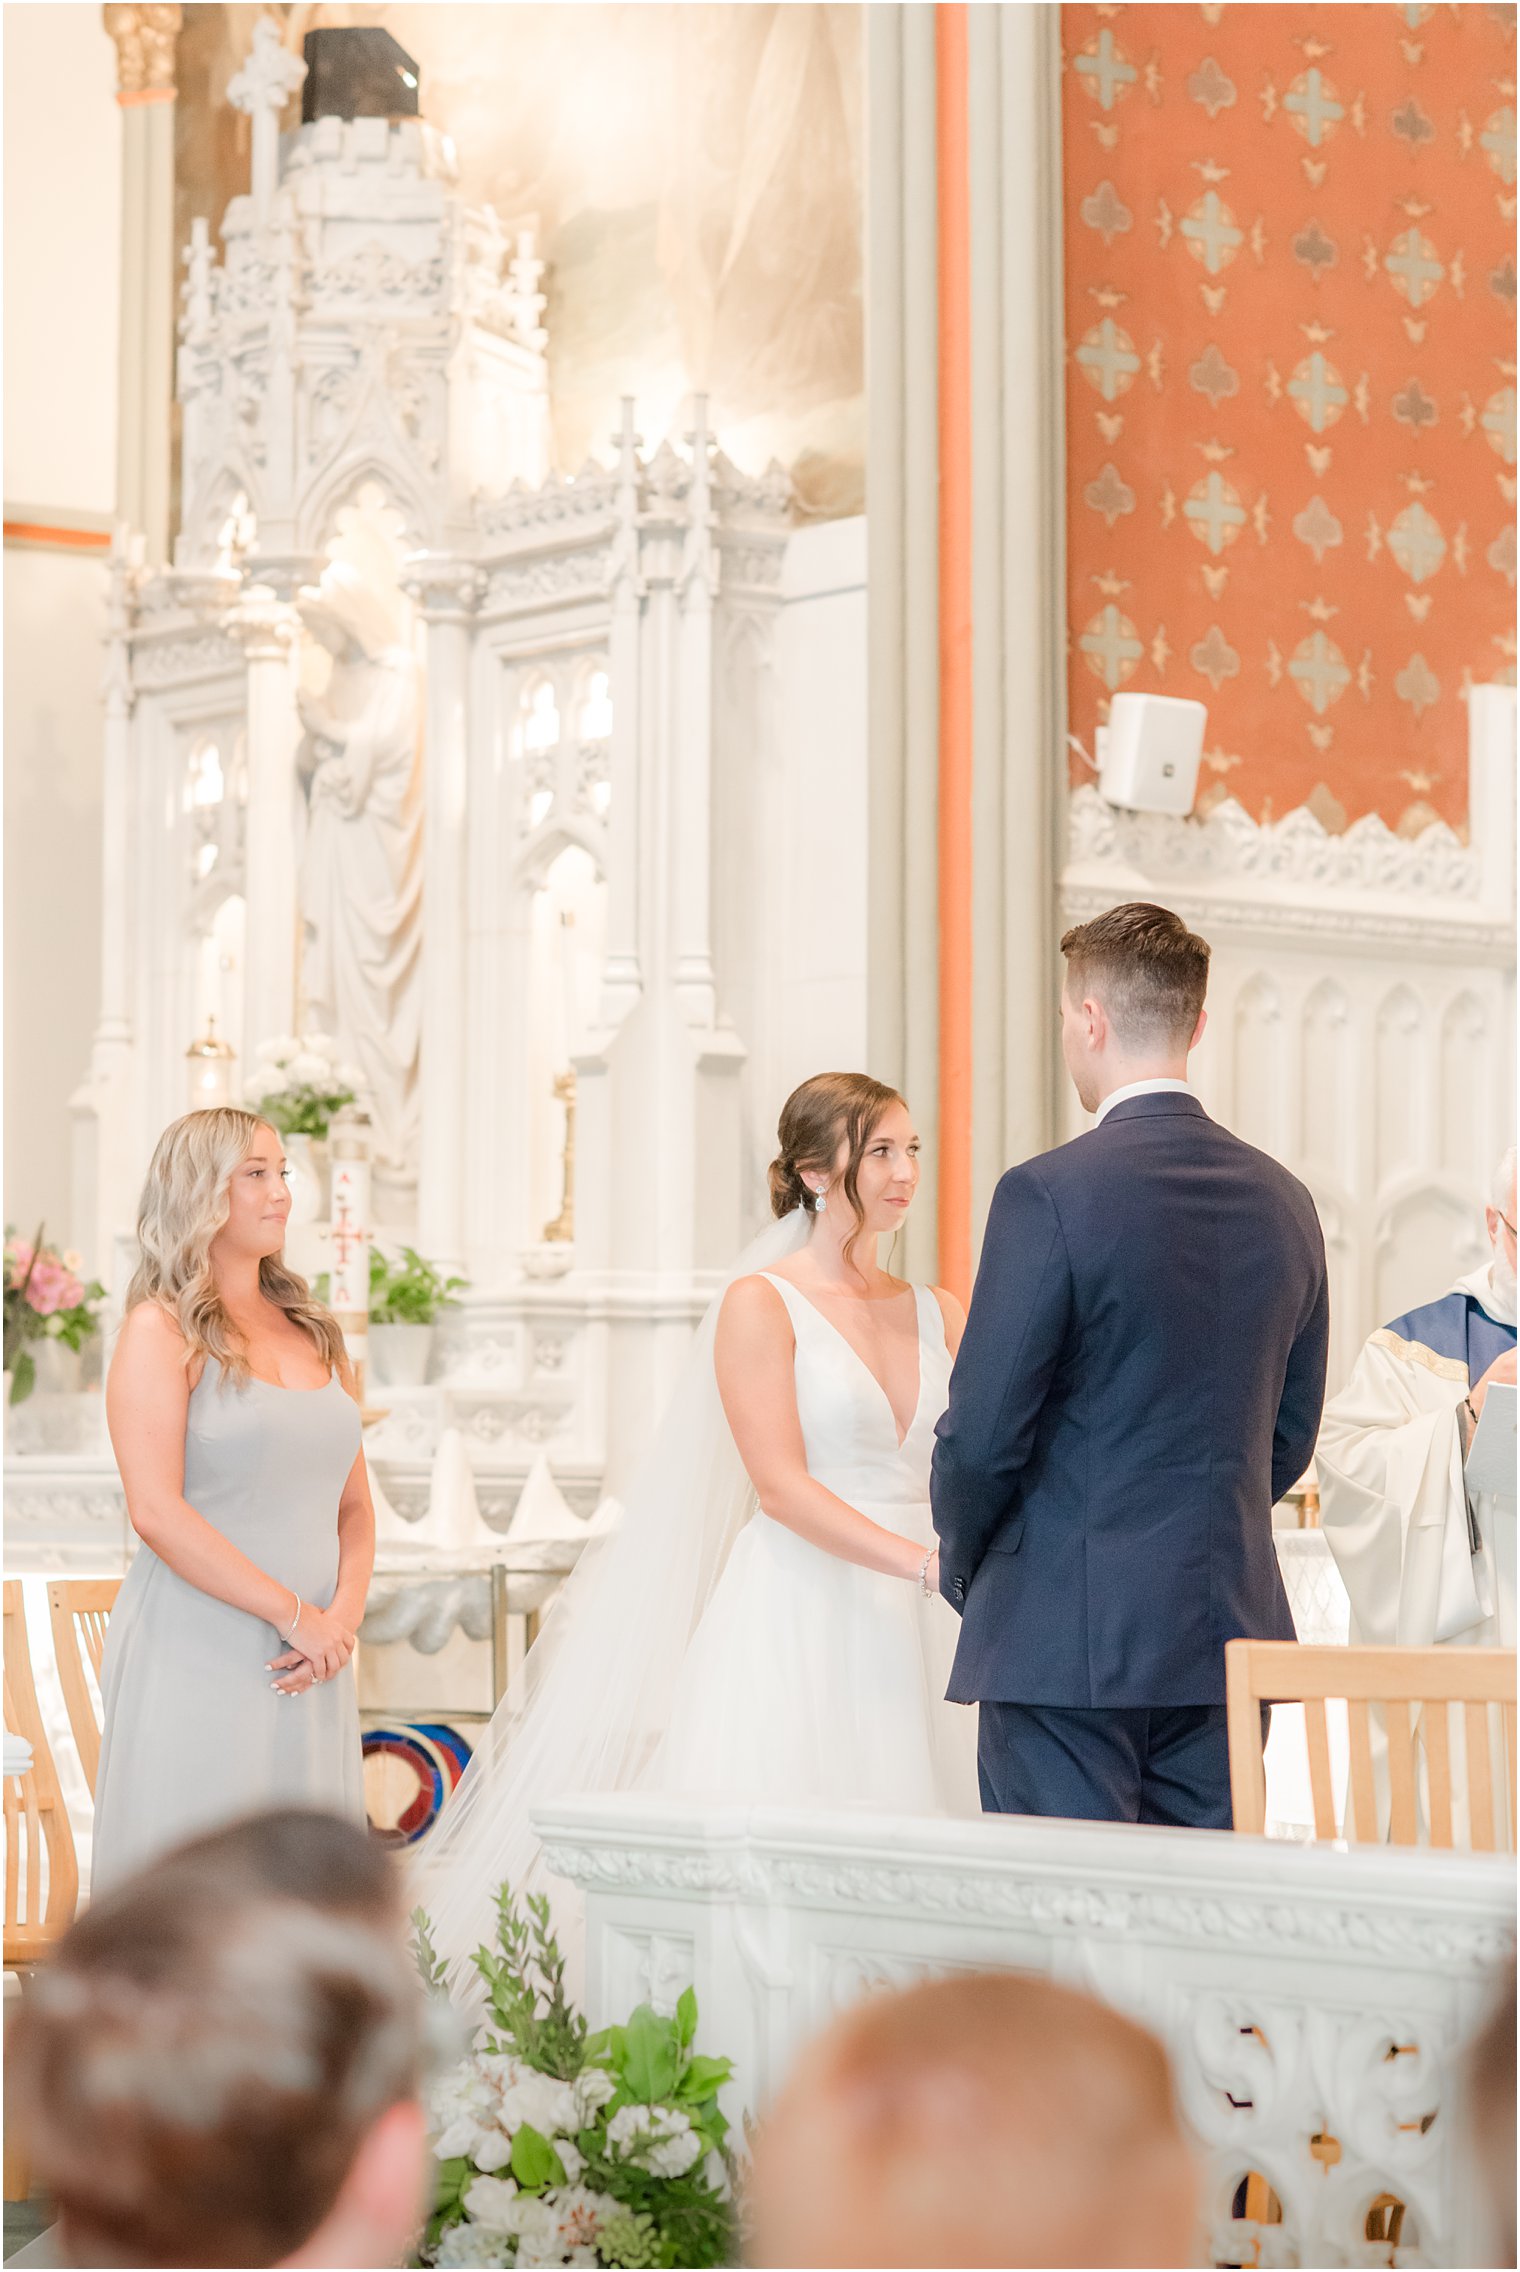 groom looks at bride during vows for traditional church wedding ceremony at St. Peter's Church